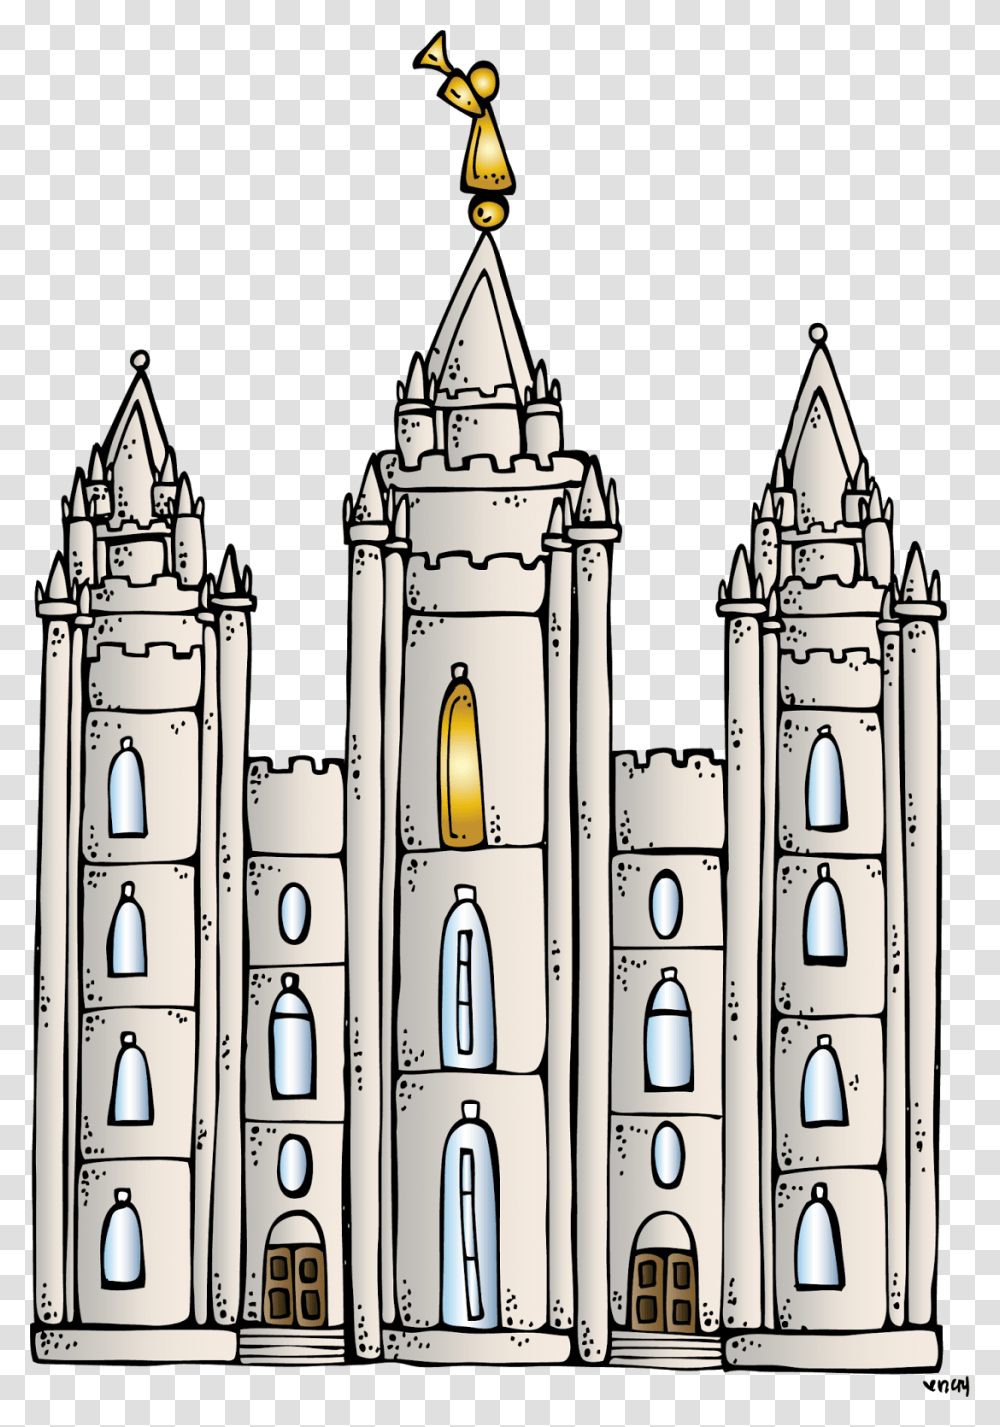 Melonheadz Lds Illustrating, Architecture, Building, Church, Cathedral Transparent Png